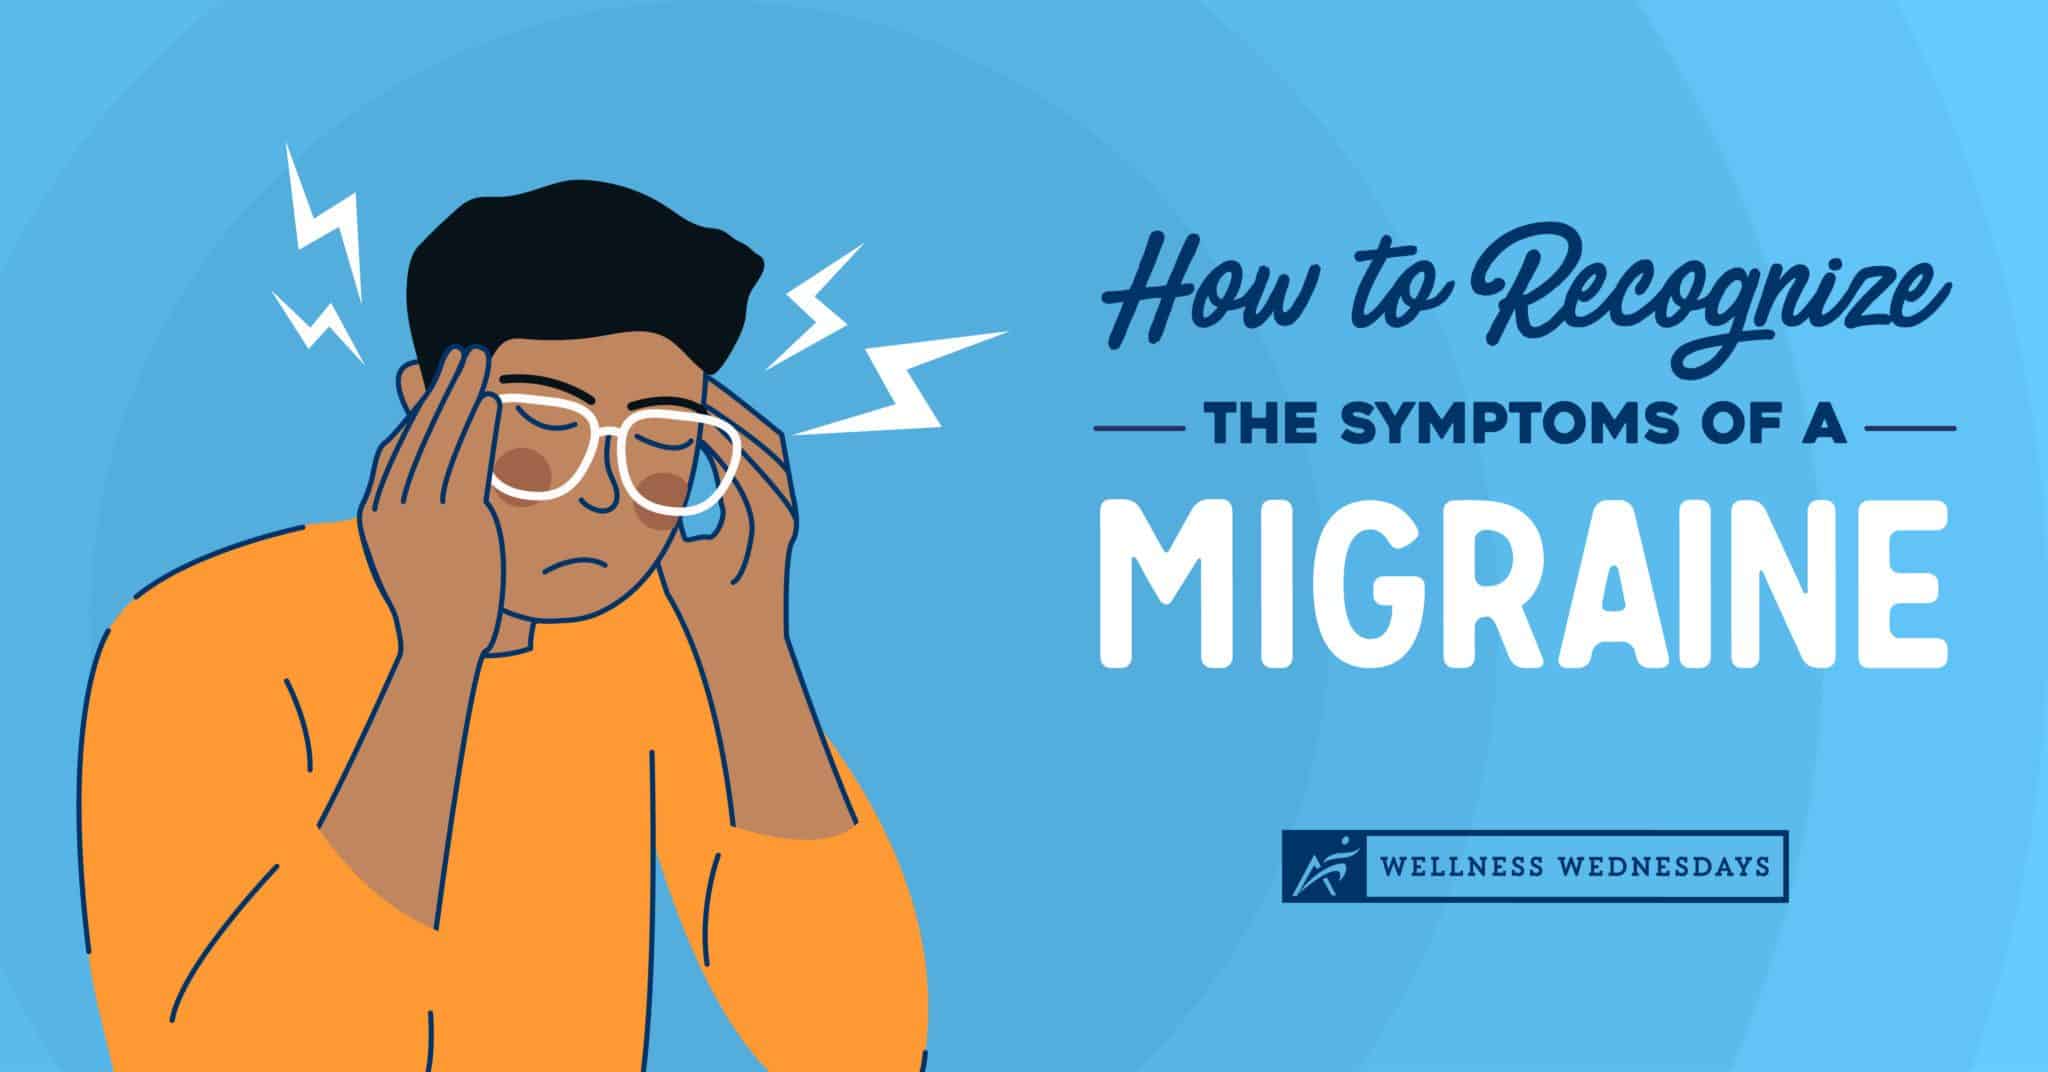 2022_04_How to Recognize the Symptoms of a Migraine_407622